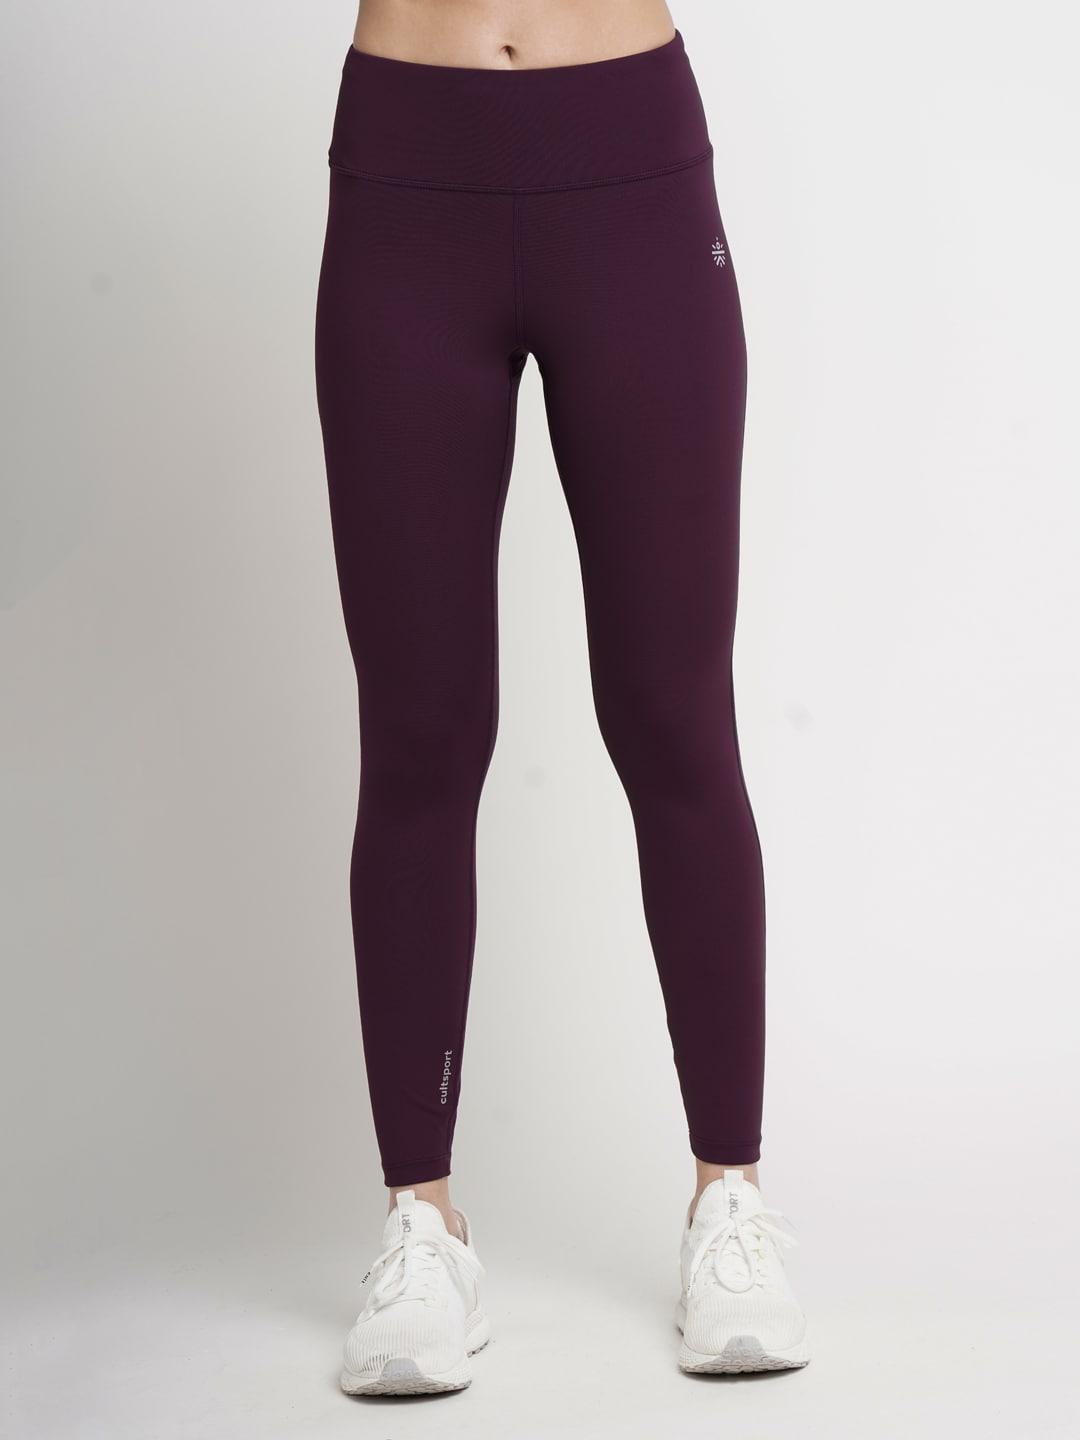 cultsport-women-burgundy-solid-anti-microbial-workout-leggings